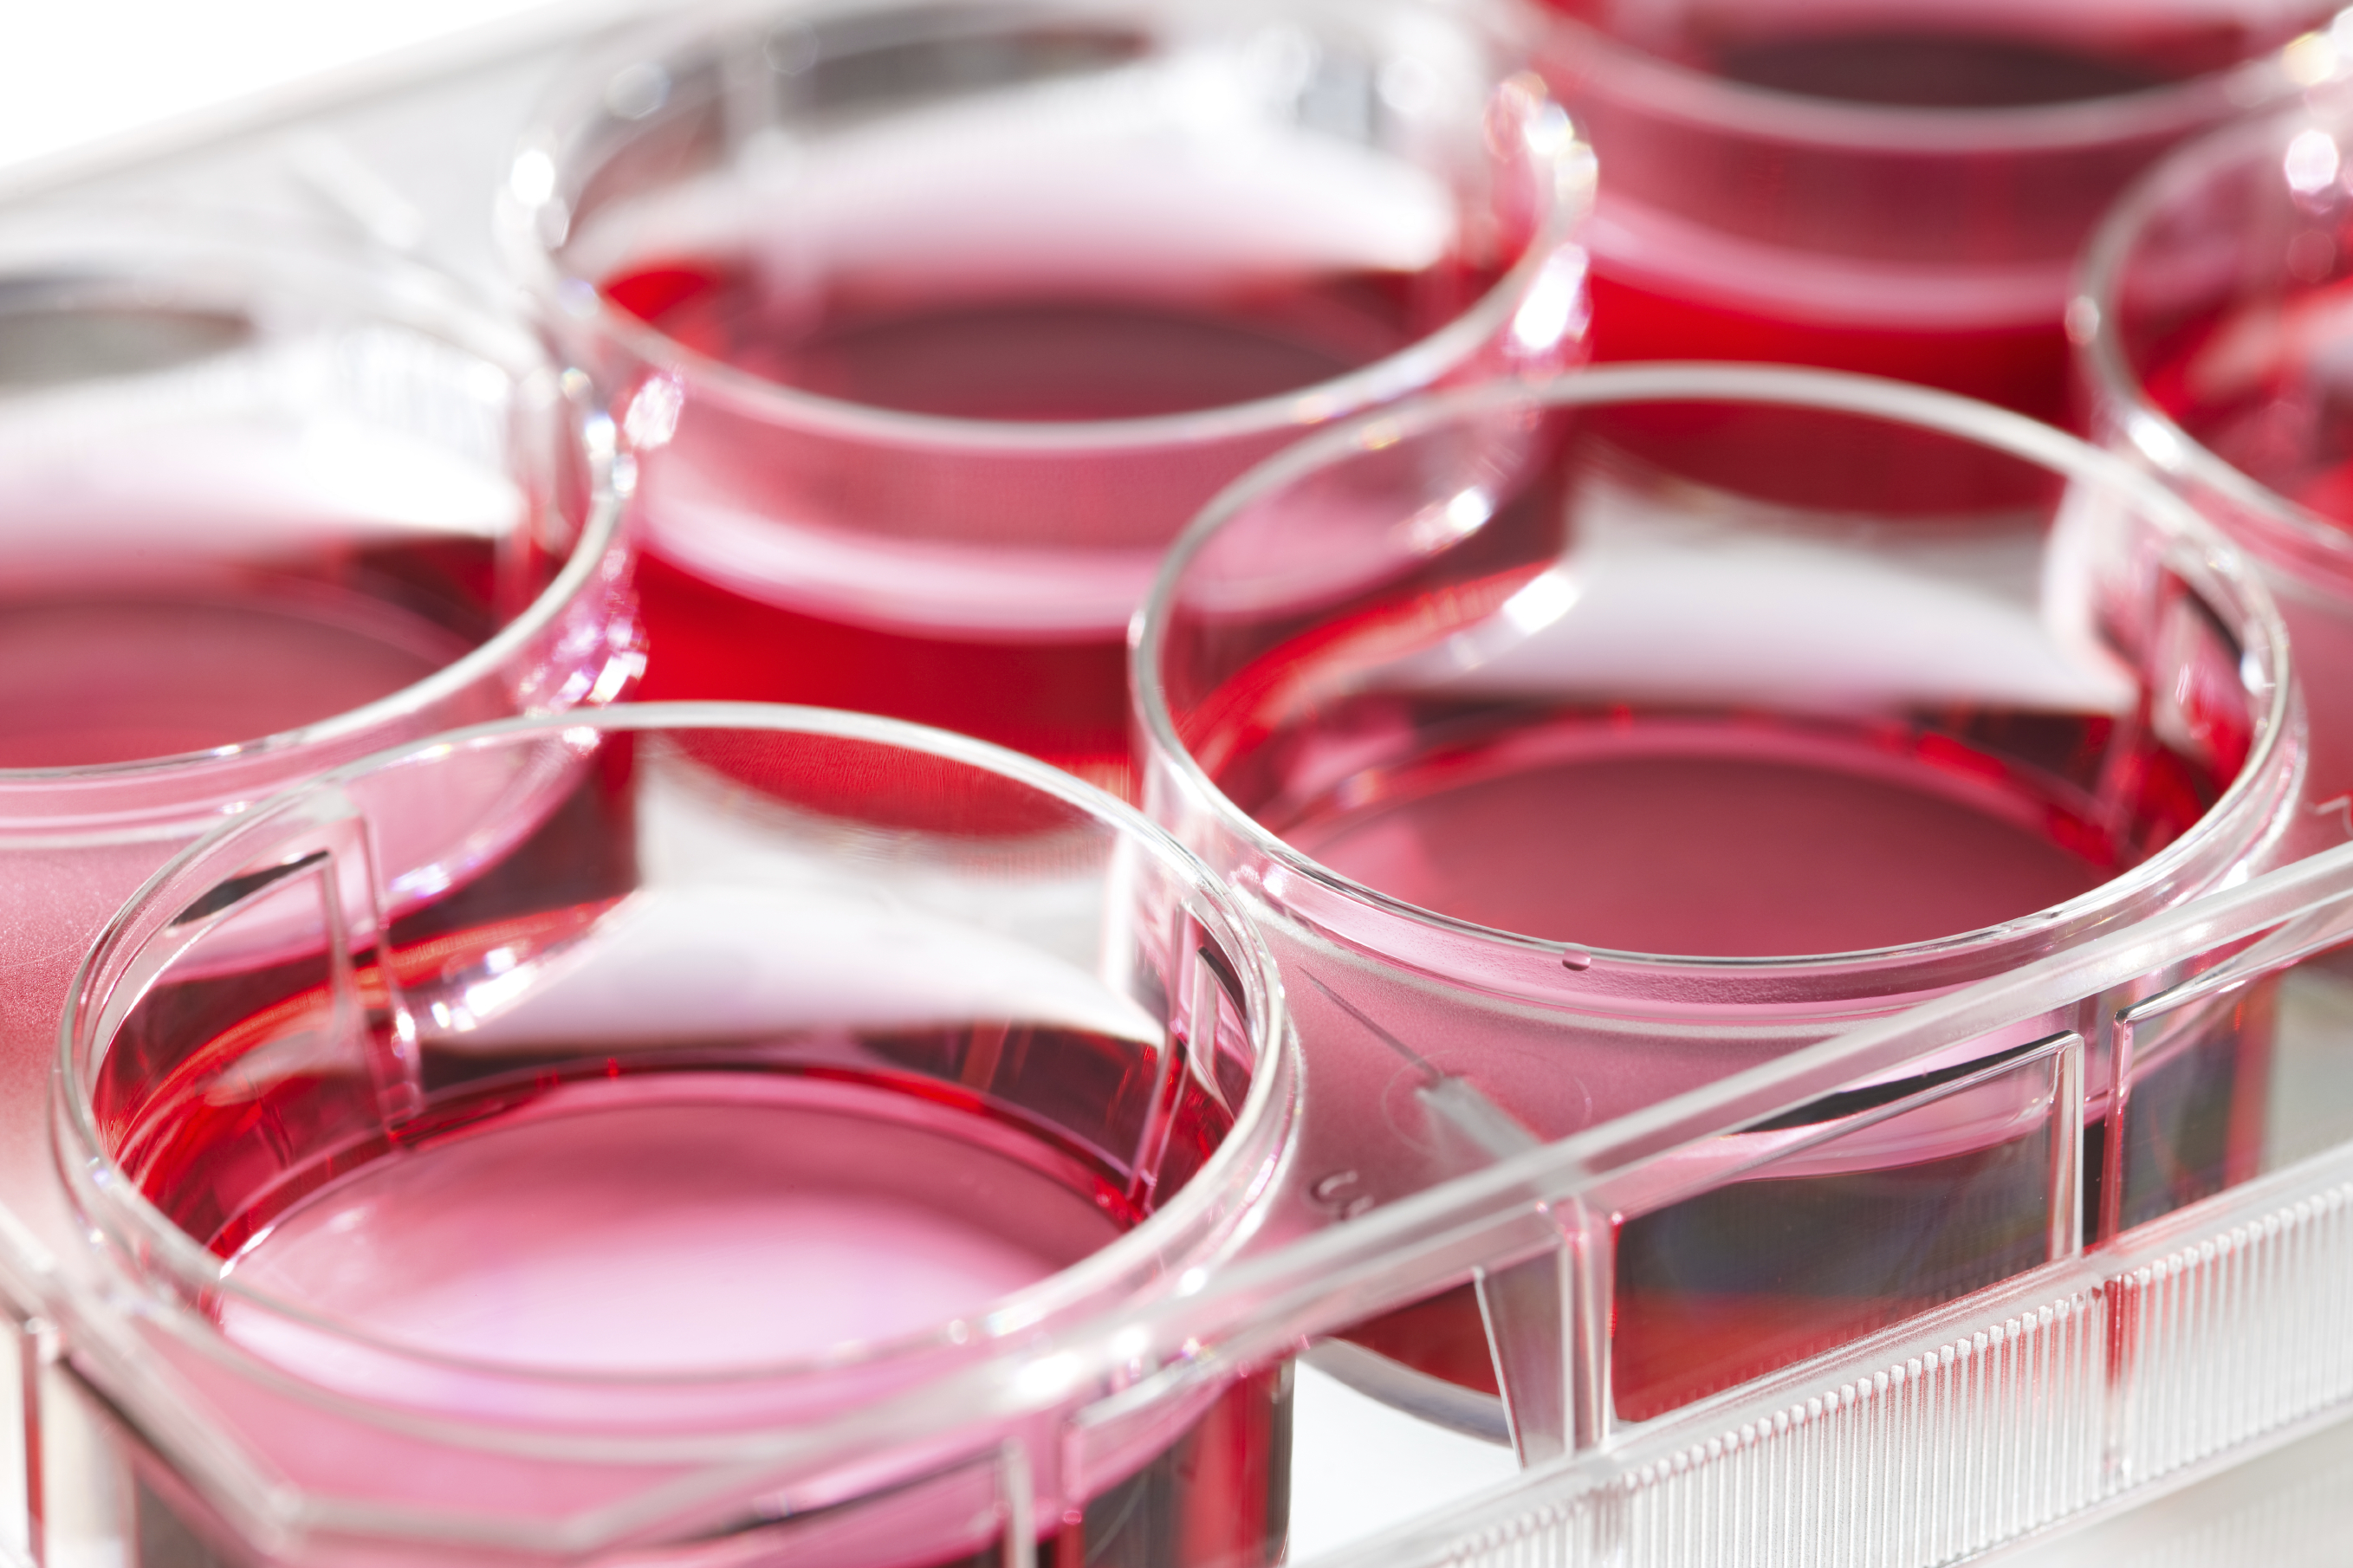 Removing Protein from Cell Culture Containers - TechNotes